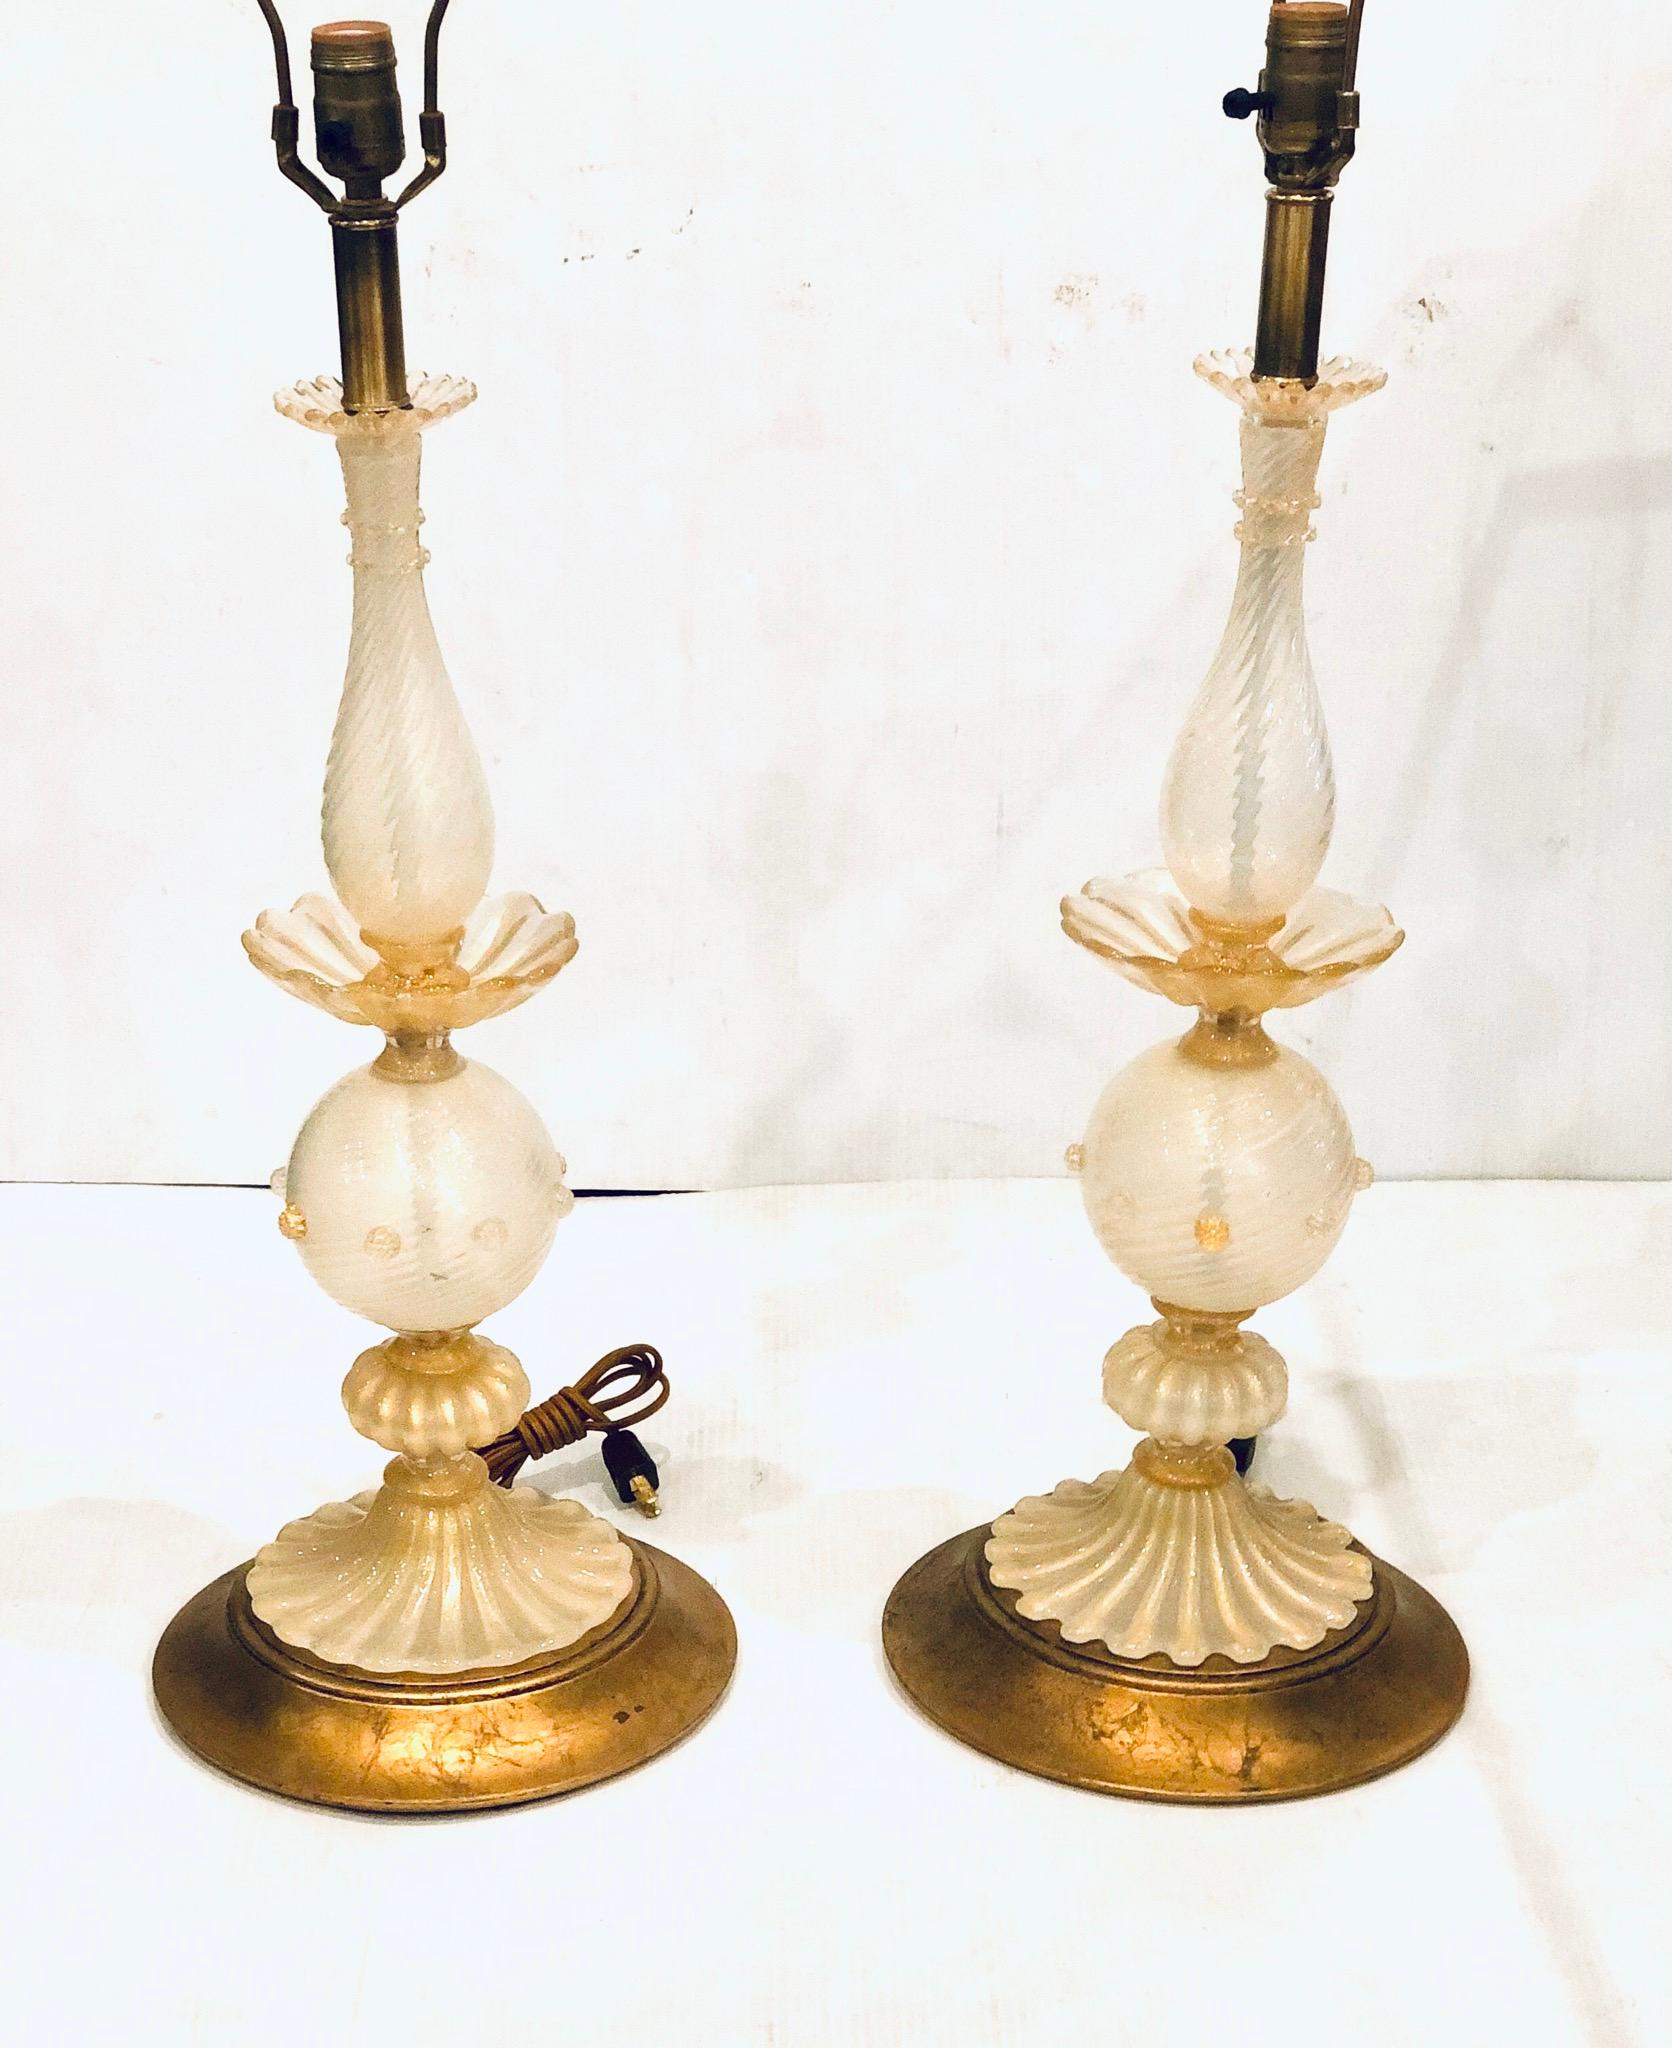 Hollywood Regency Pair of Tall Murano Lamps with Gold Leaf Bases In Excellent Condition For Sale In San Diego, CA